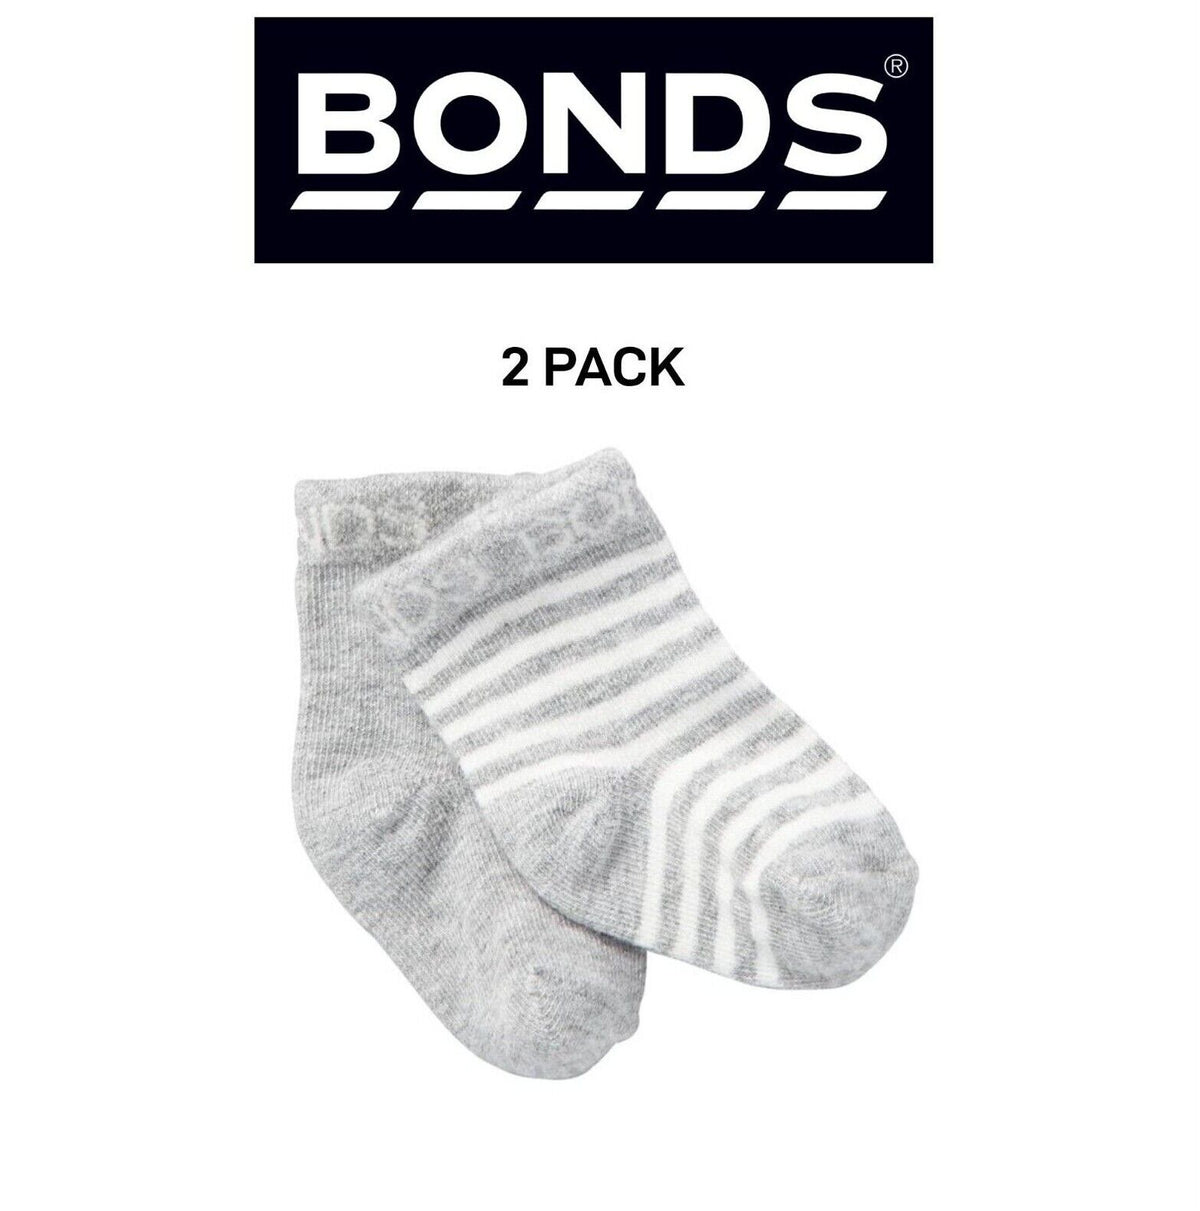 Bonds Baby Classics Bootee Comfortable Soft Natural Cotton 2 Pack RYY92N